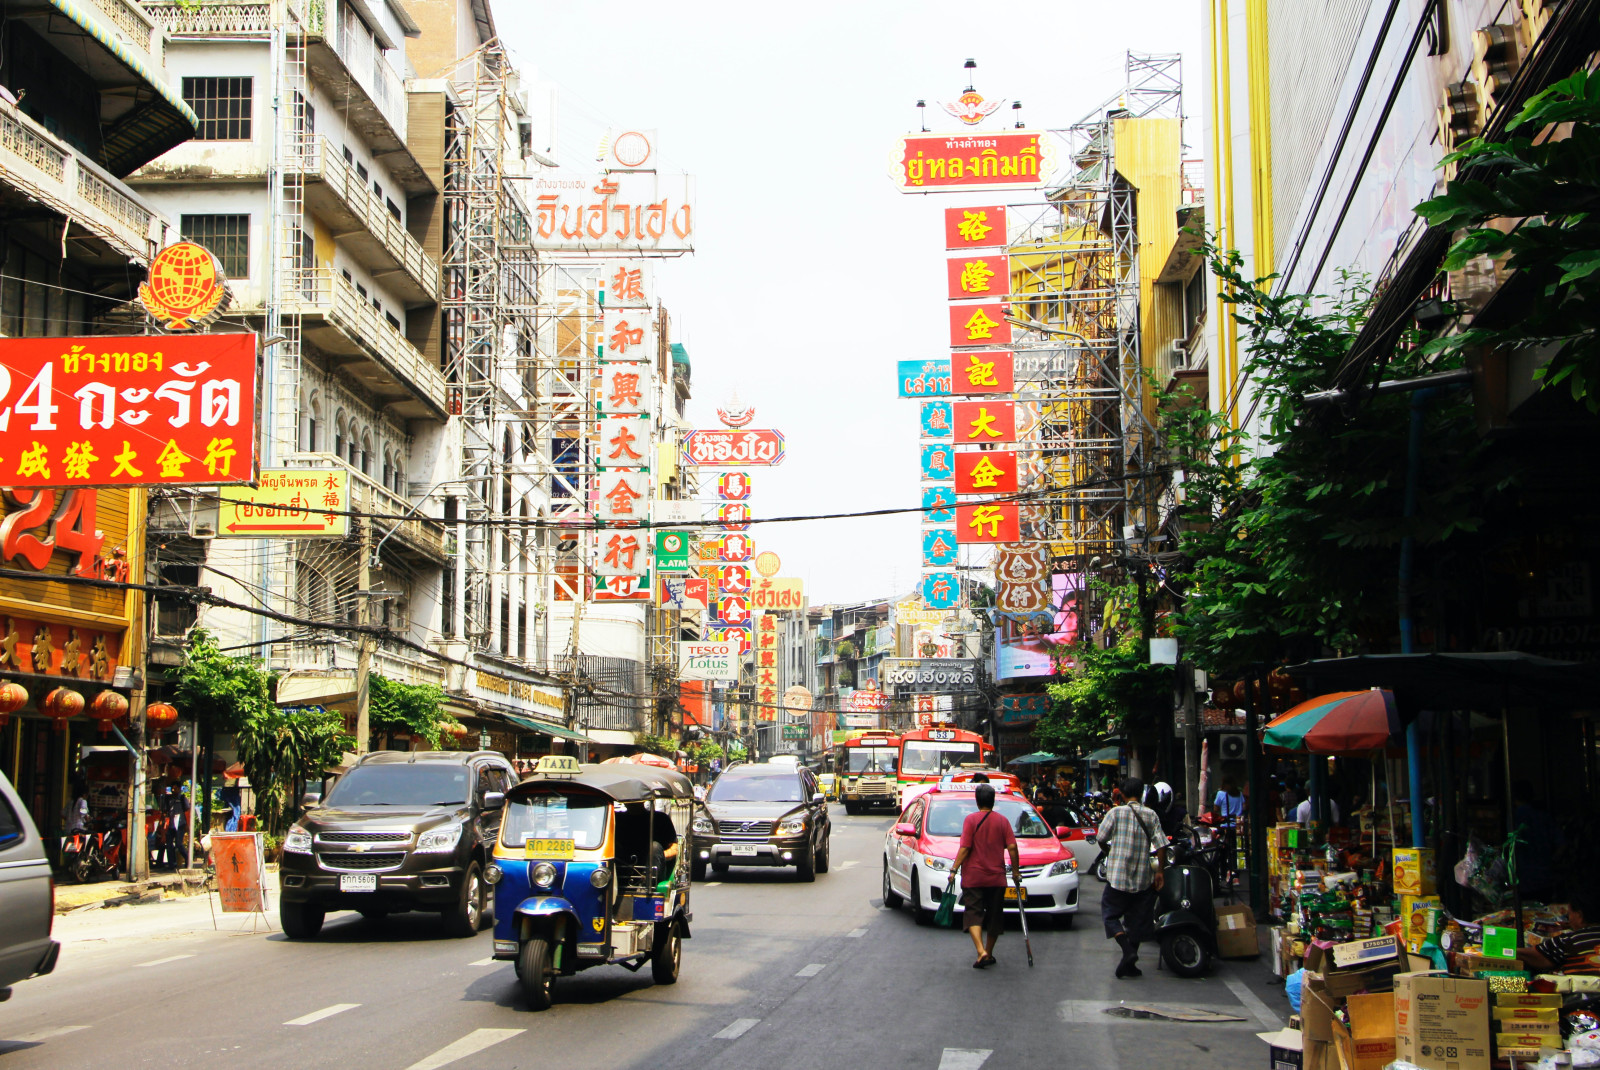 A crowded street full of cars, people, and tuk tuks in Bangkok, Thailand with yellow and red signs, white buildings, with green, leafy trees and phone lines.  